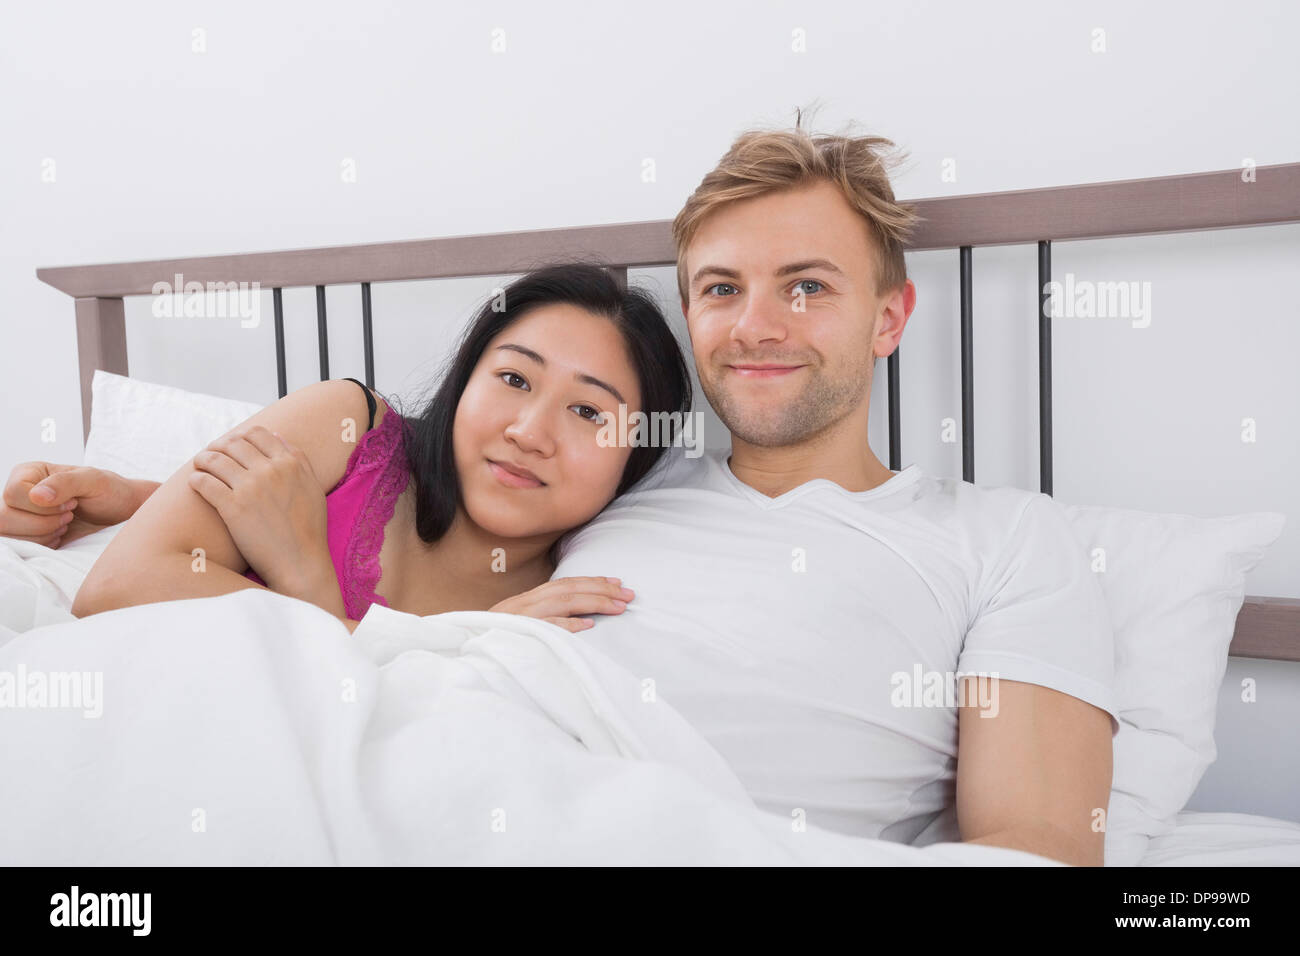 Portrait of loving couple in bed Banque D'Images